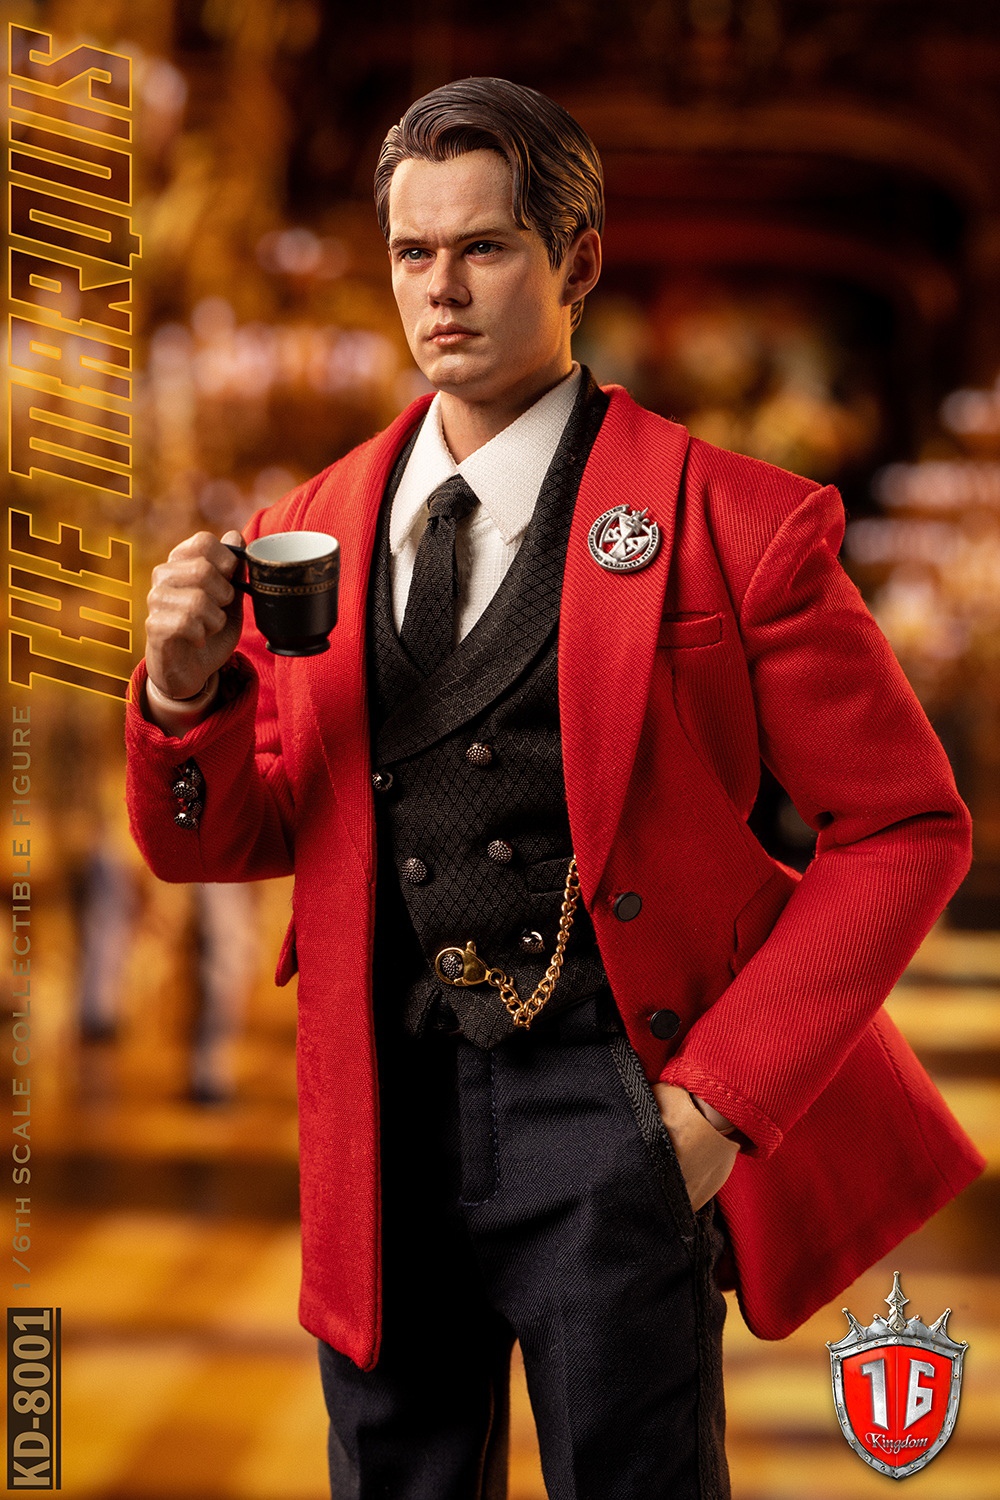 Kingdom - NEW PRODUCT: Kingdom: 1/6 The Marquis Action Figure KD-8001 11401010